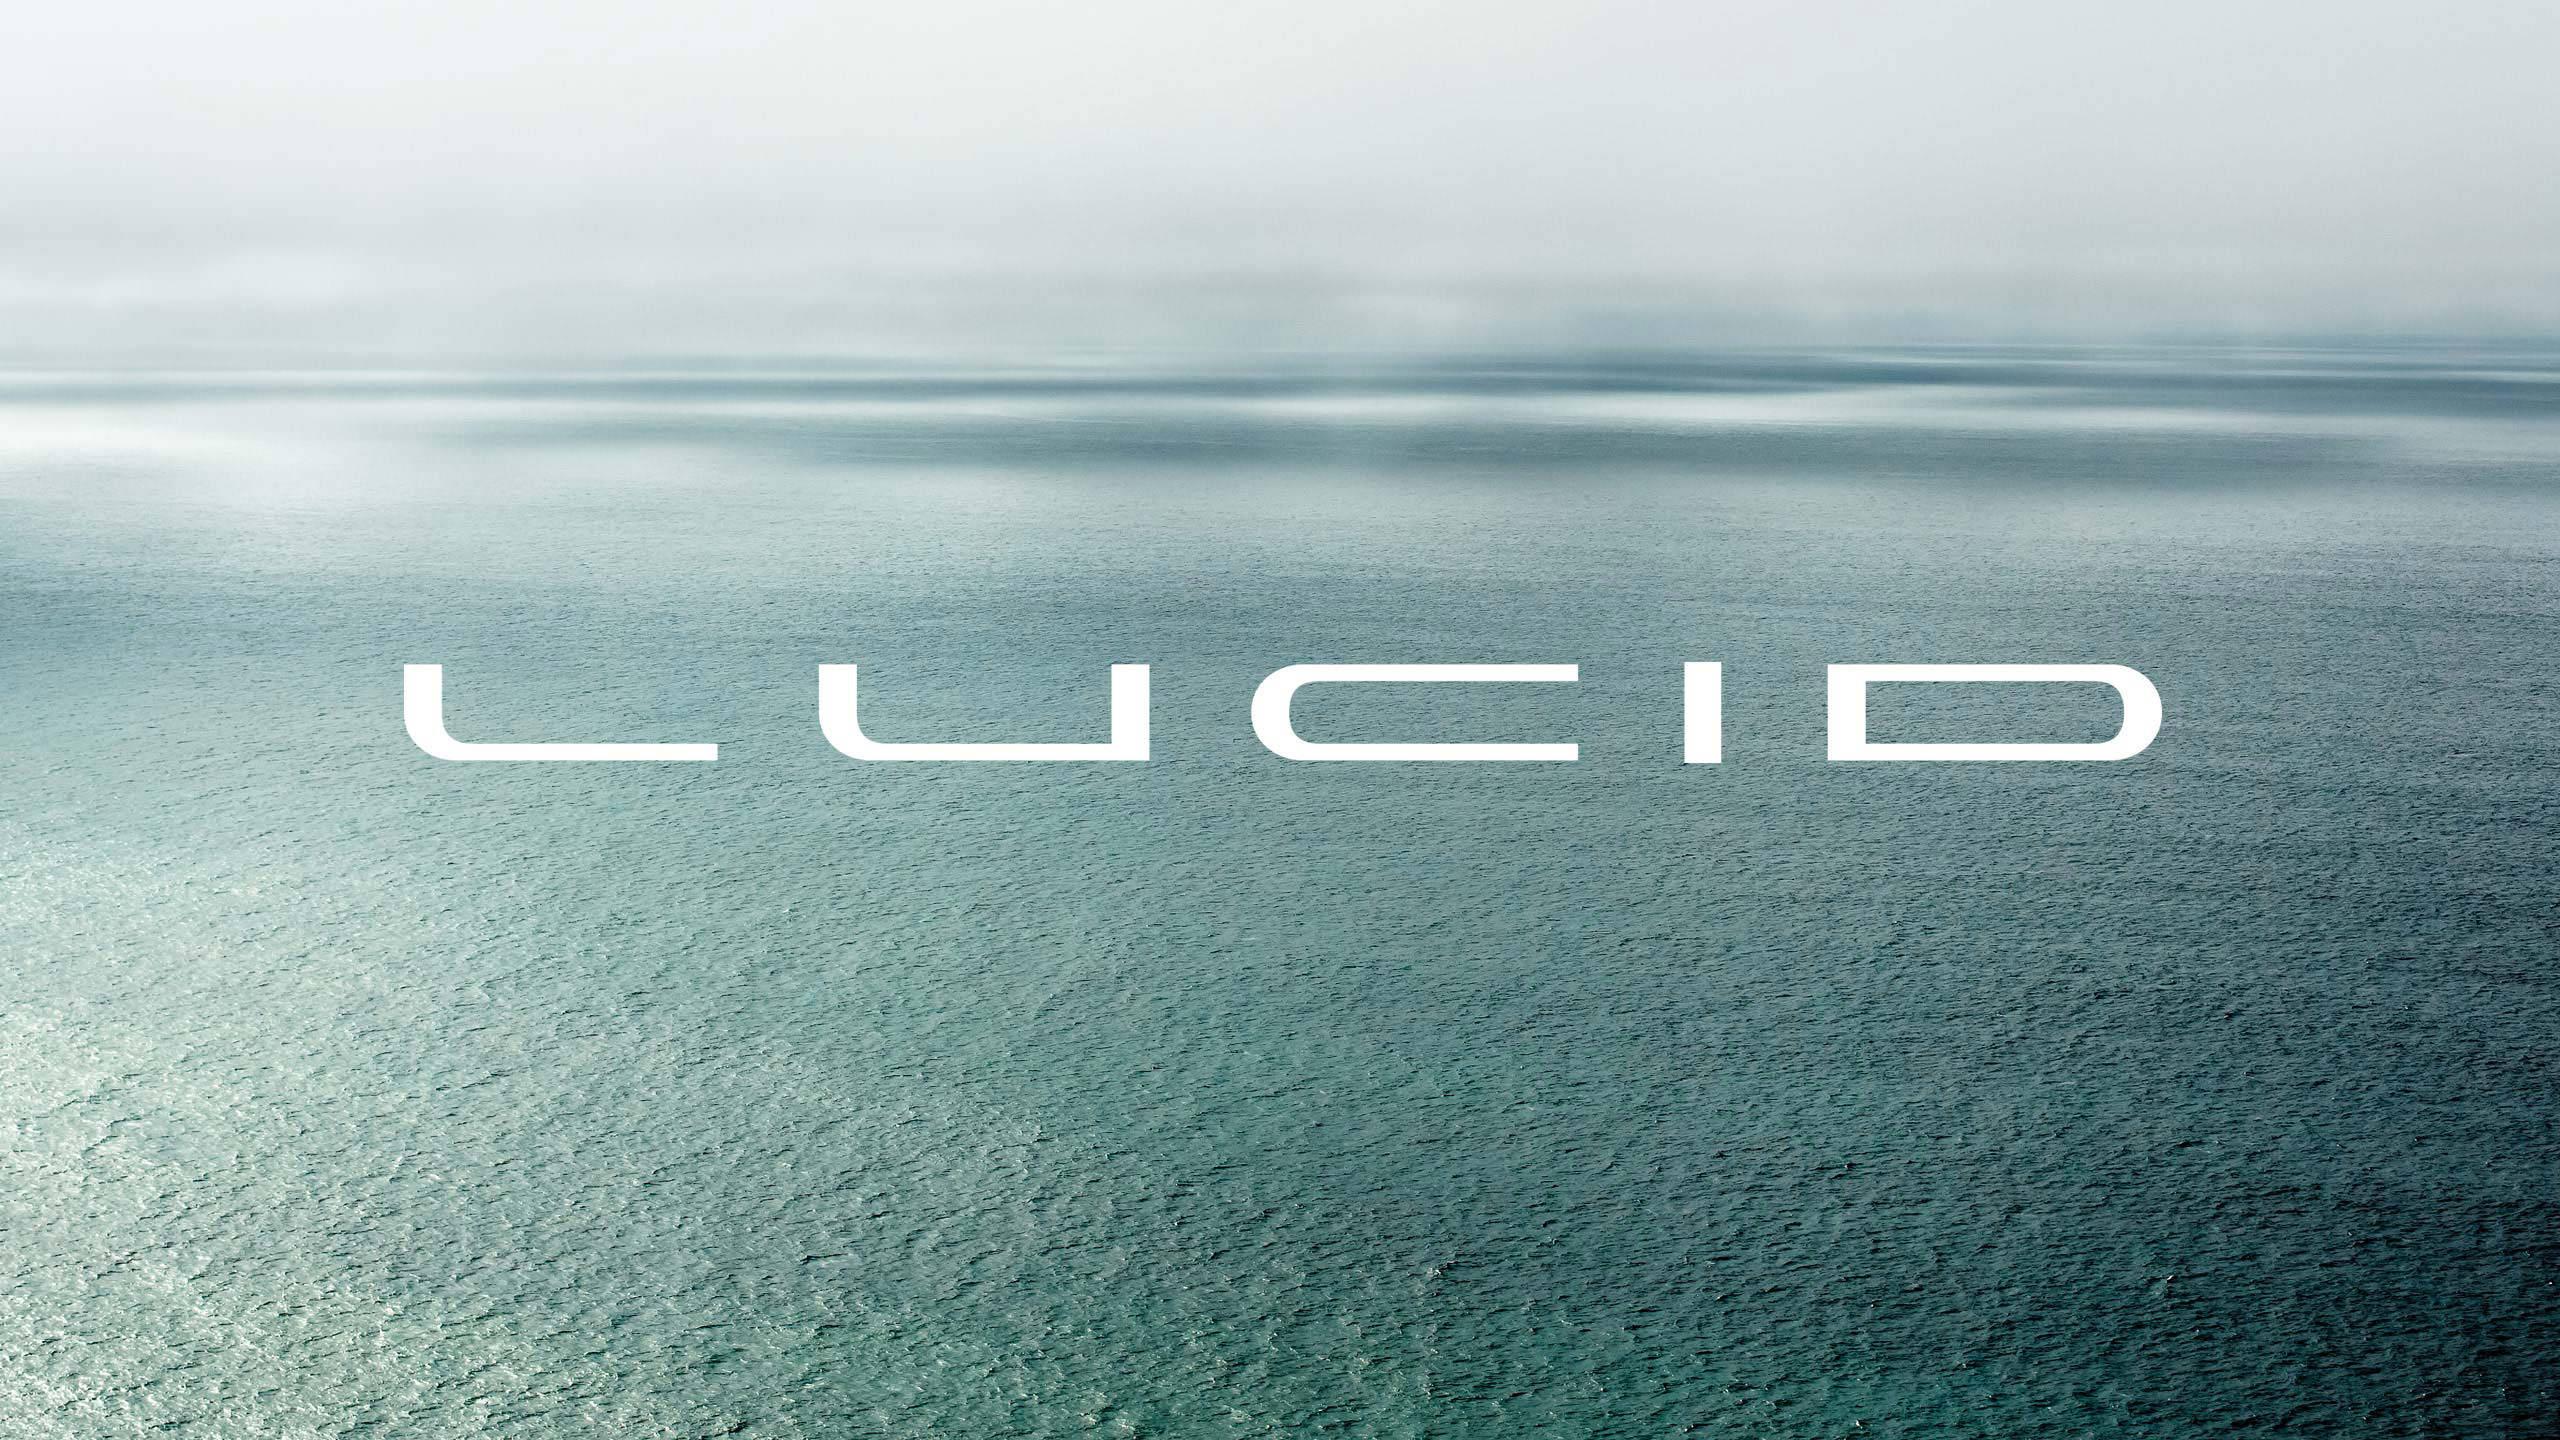 Tolleson Logo - Building the Lucid Motors Brand - Tolleson